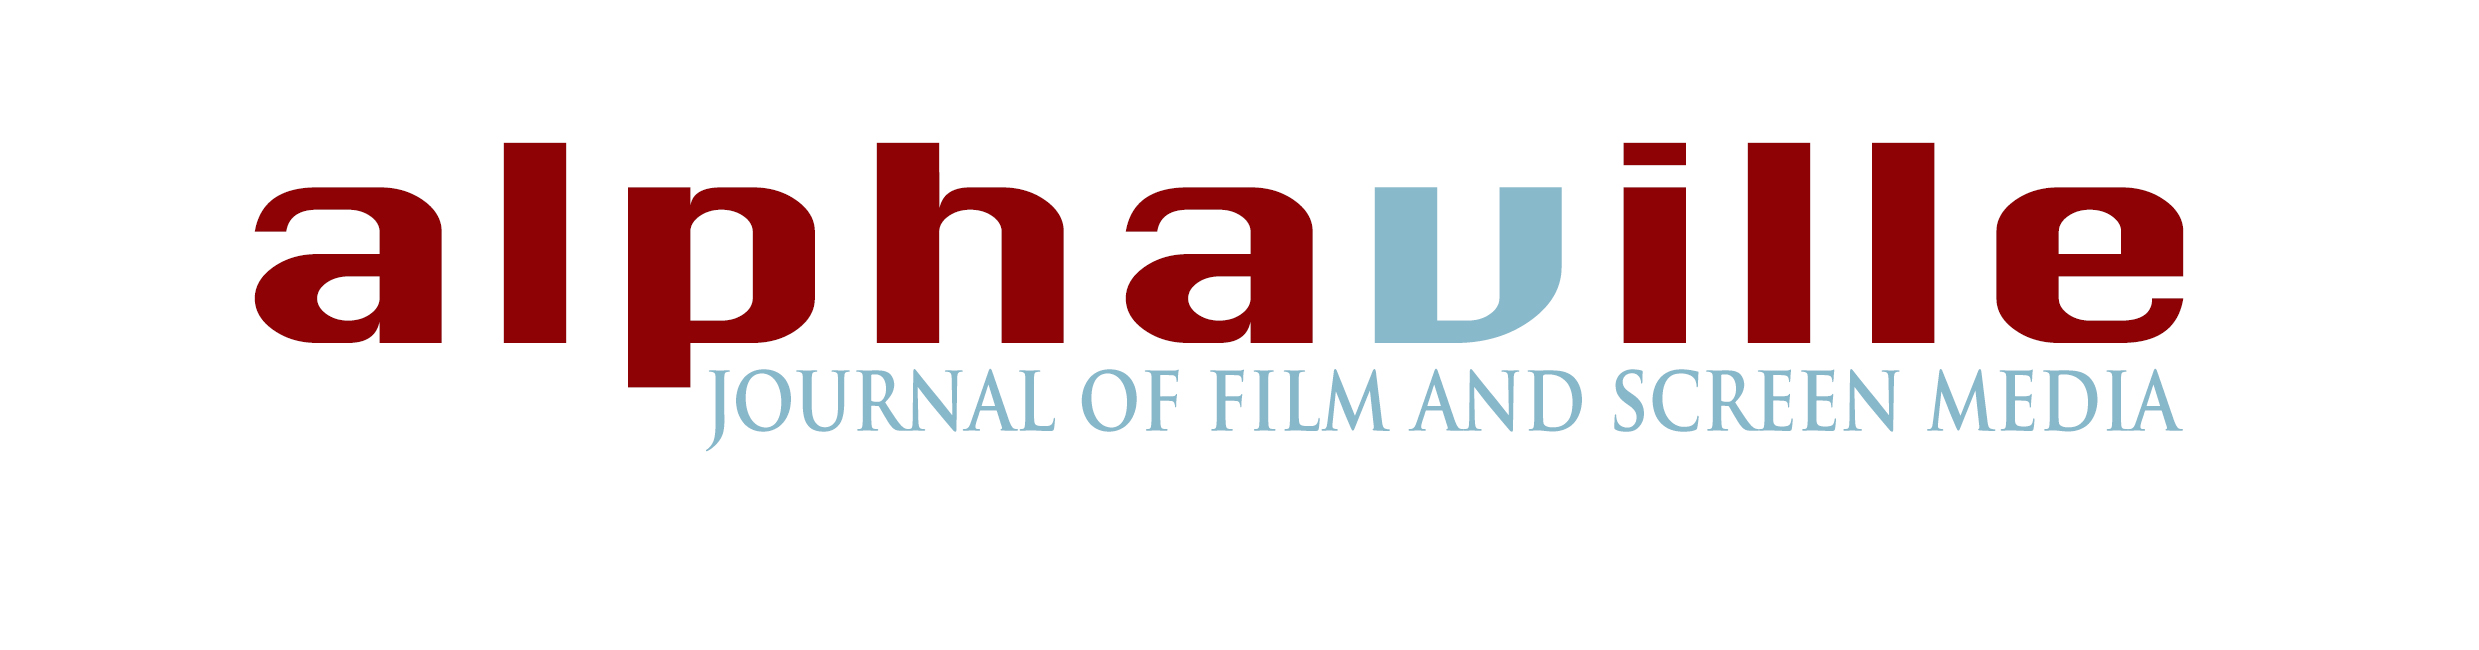 Alphaville Journal of Film & Screen Media - A Call For Papers